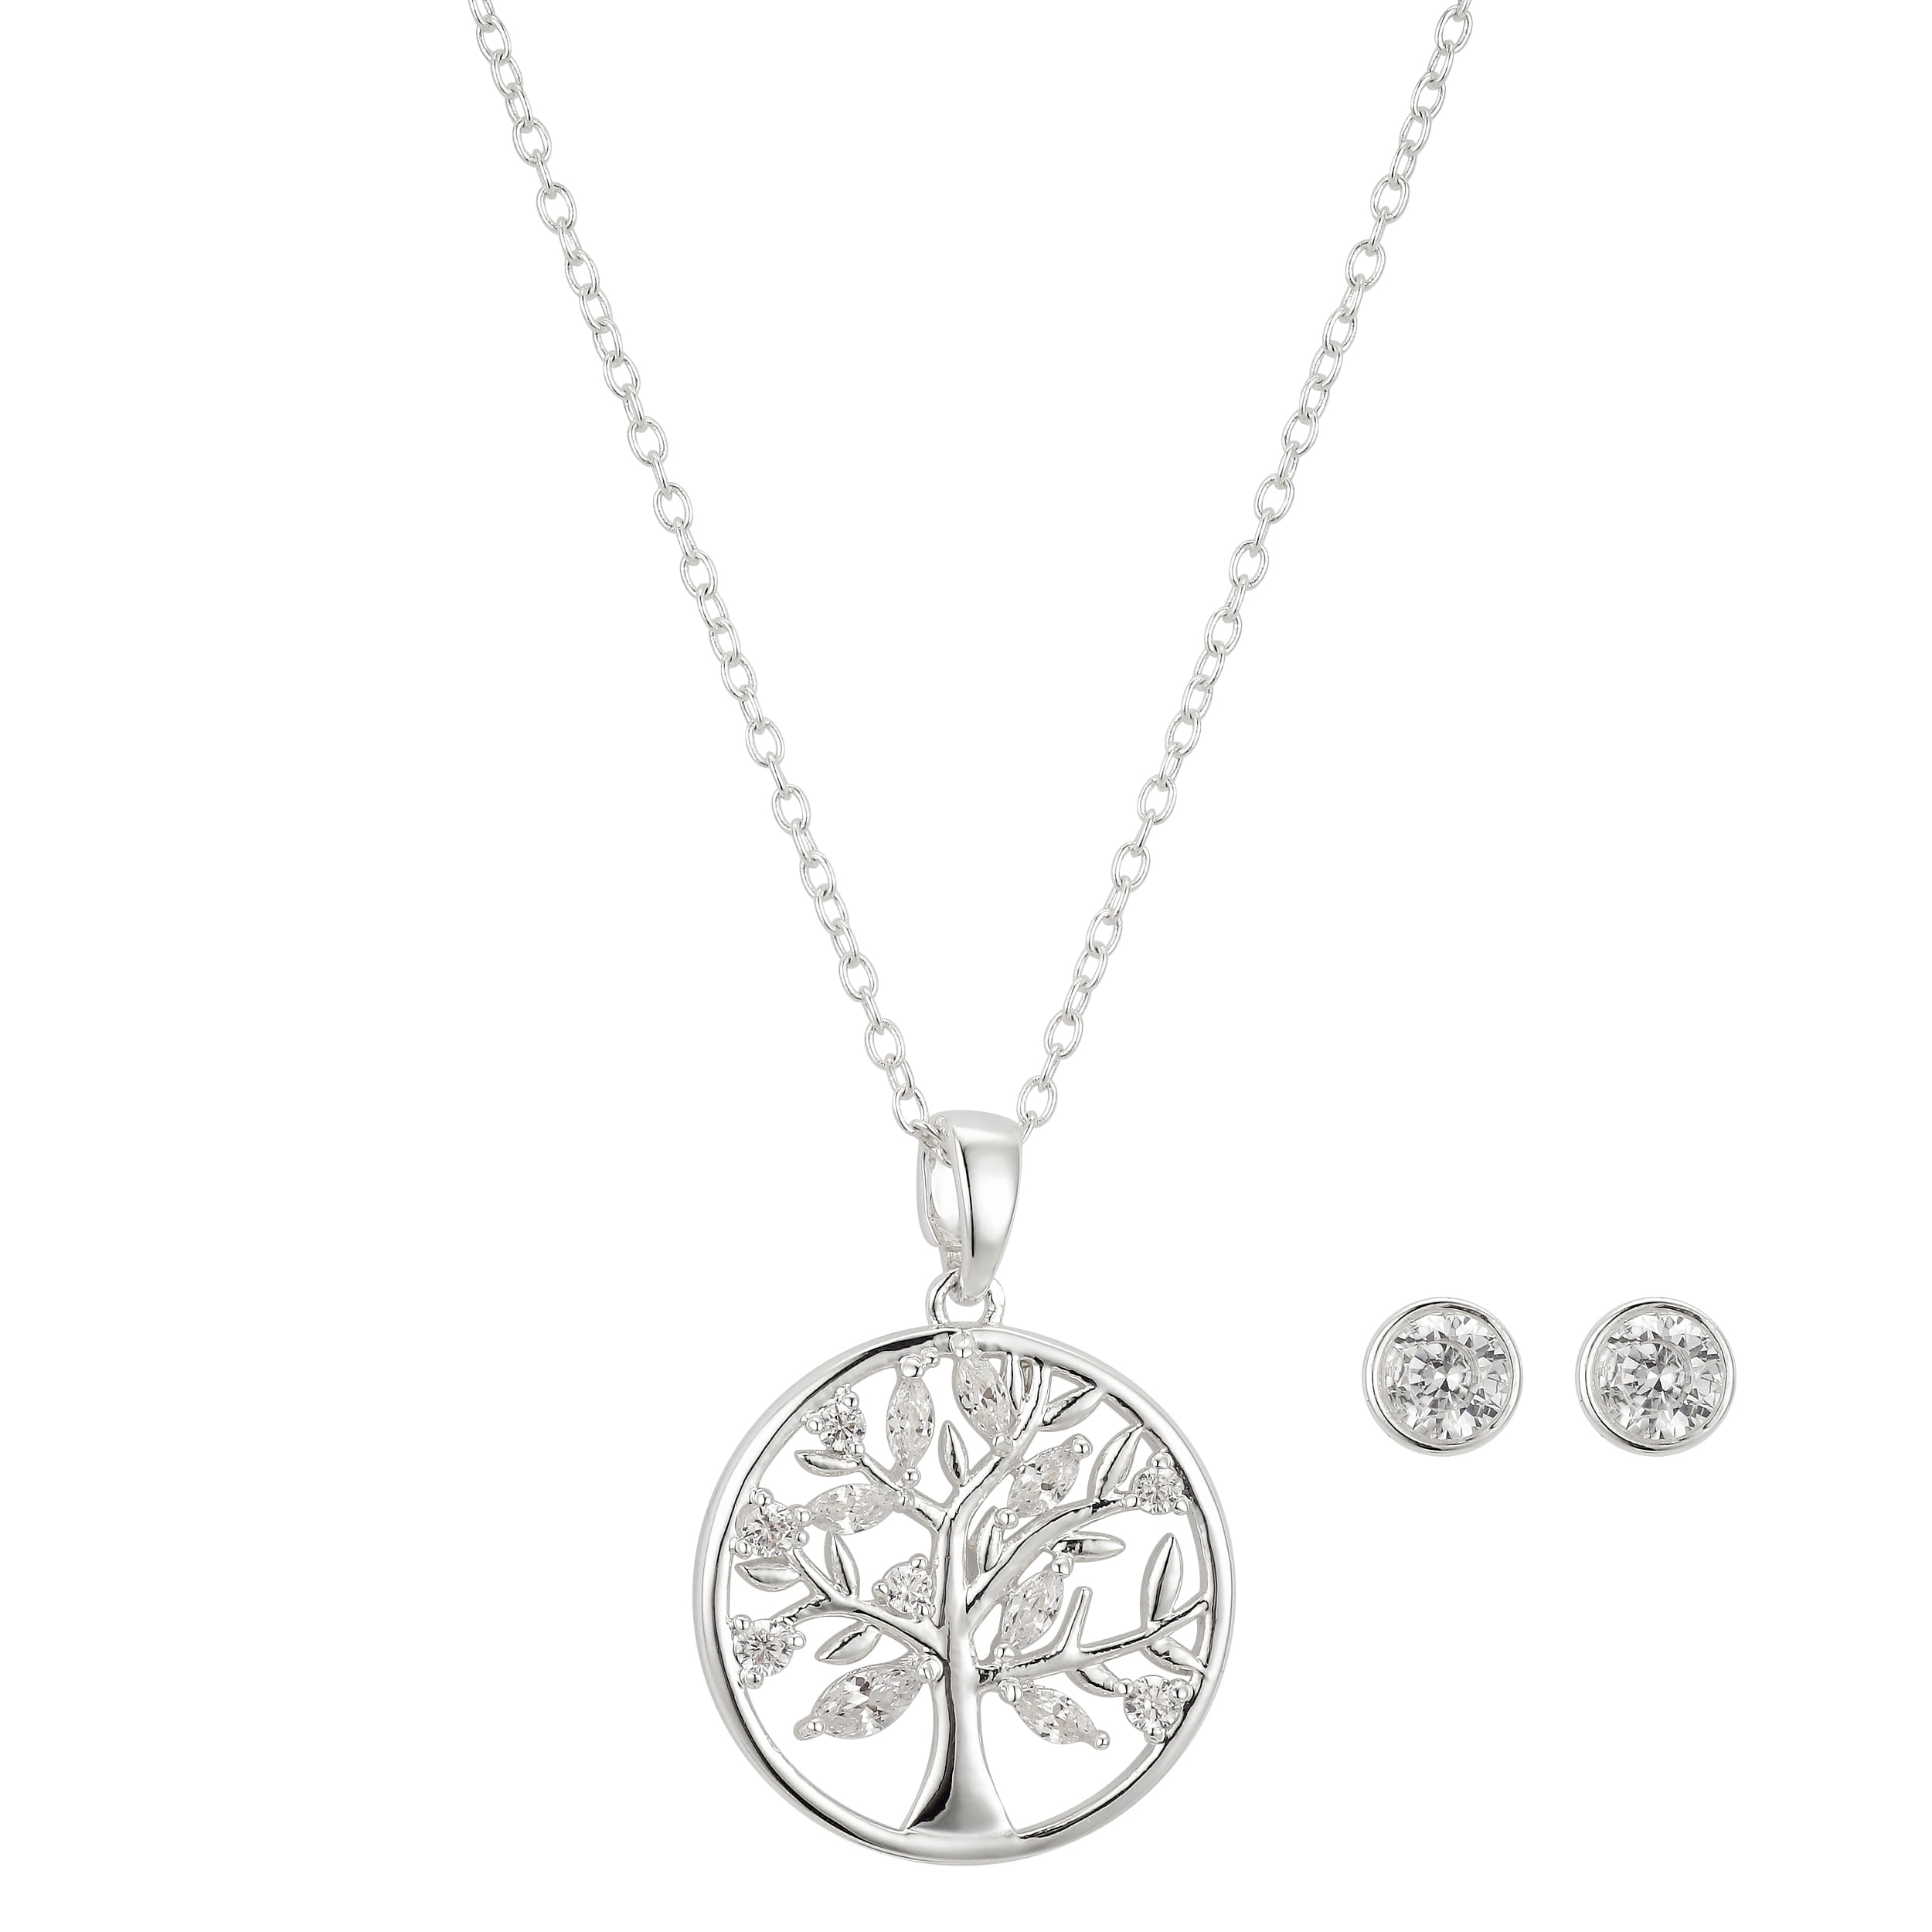 Silver Tone Crafts Avenue Tree Branches Necklace Nature Inspired Tree Leaves Necklaces for Women